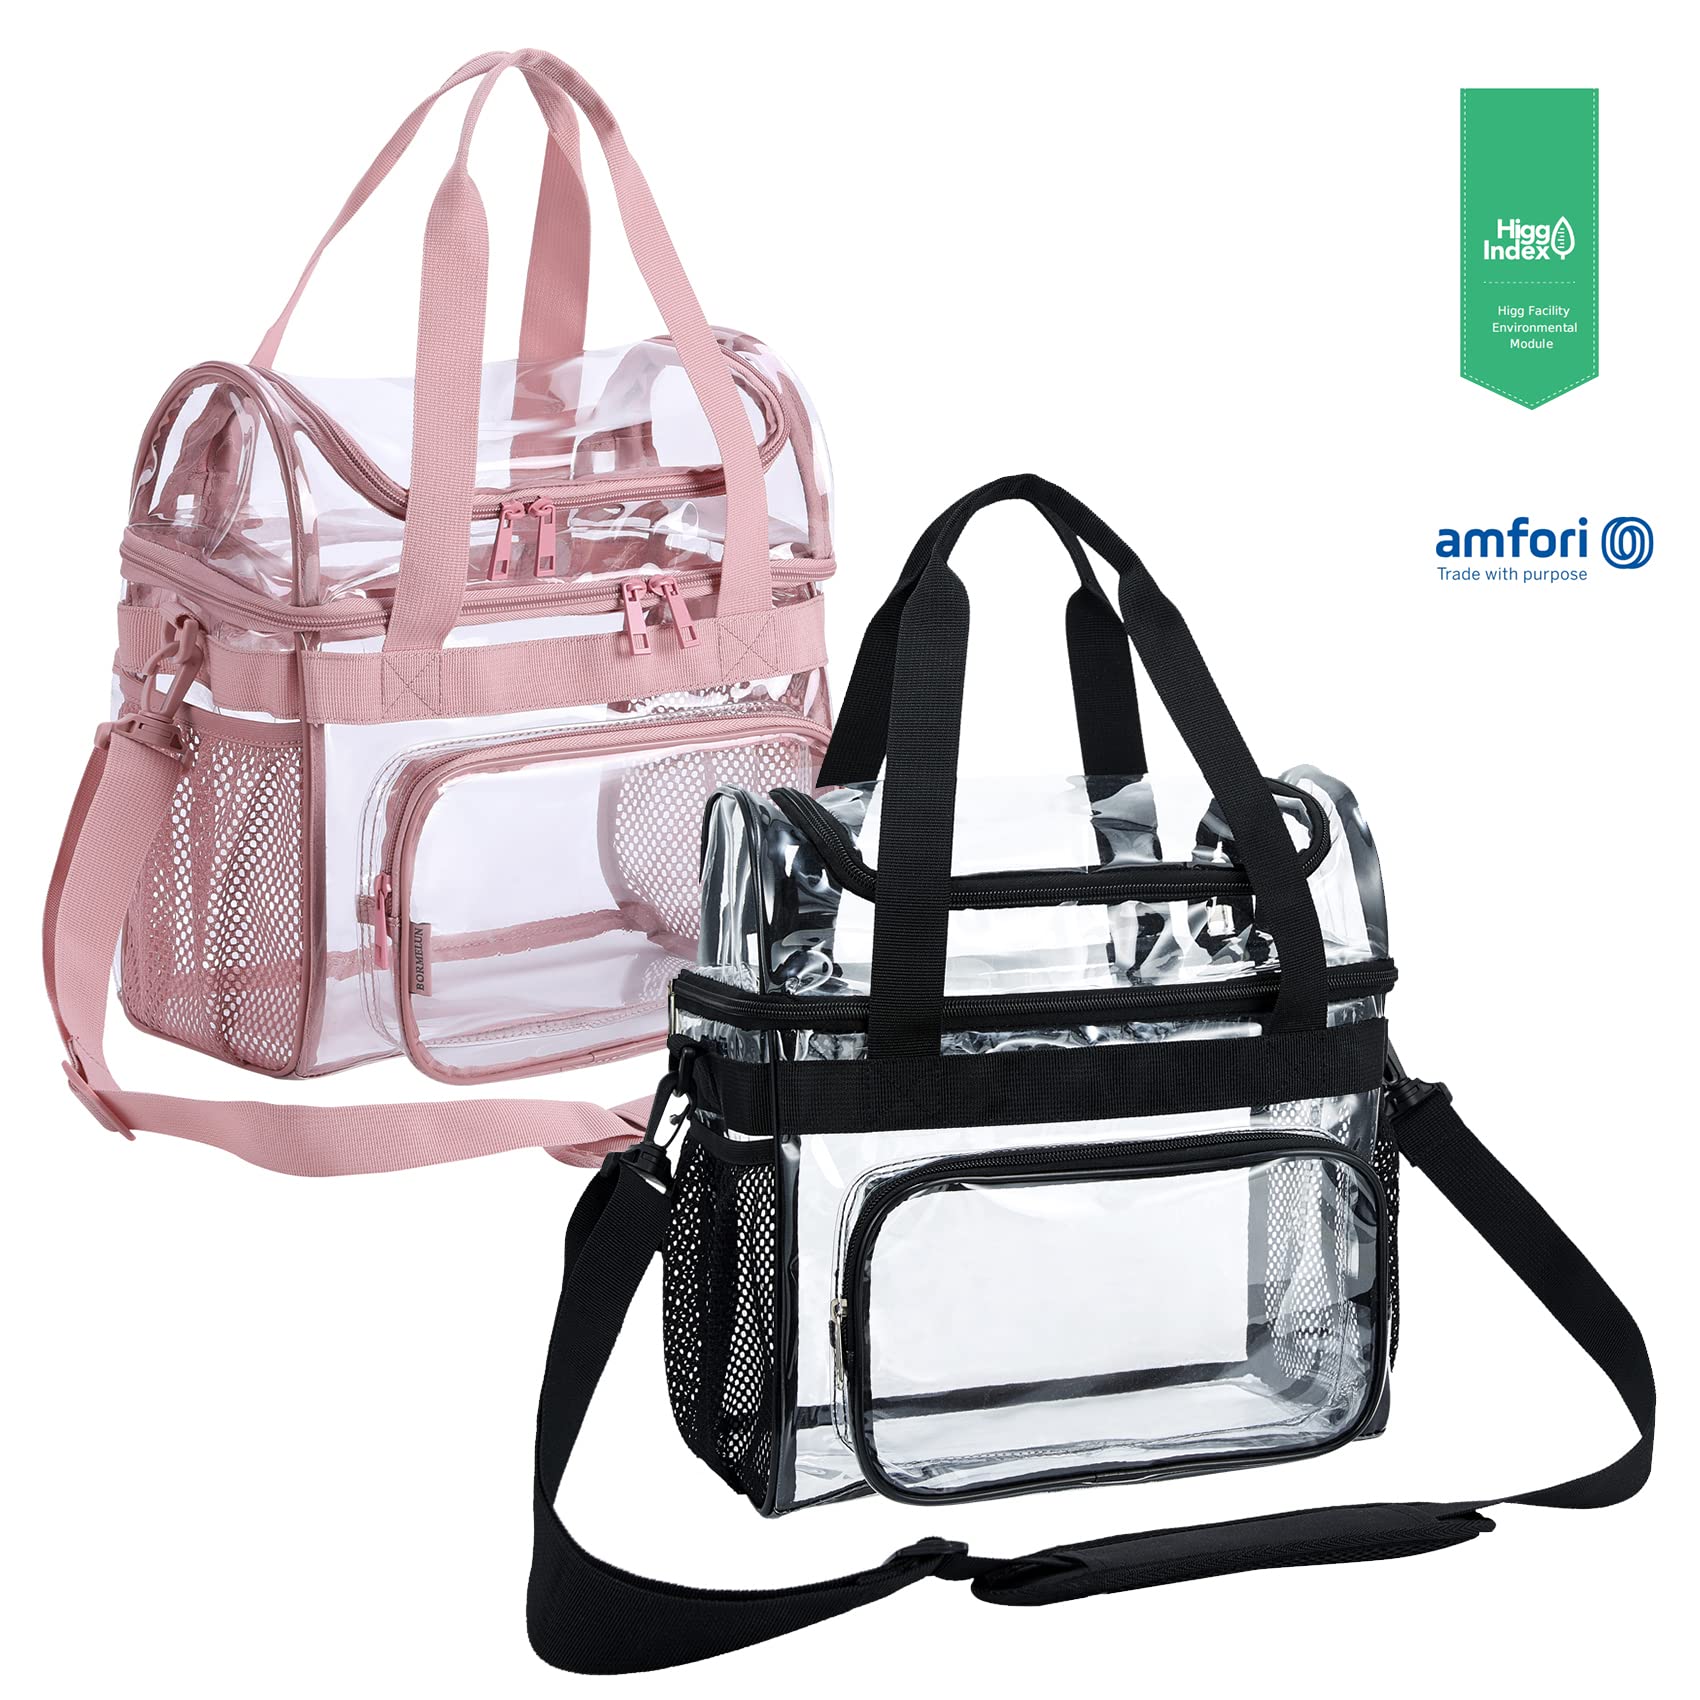 Double Tote Heavy-Duty Pink Clear Lunch Bag for Work: Extra Large 12x12x6 Size - Stadium Approved, Ideal for College, Concerts or Correctional Nurse Officers